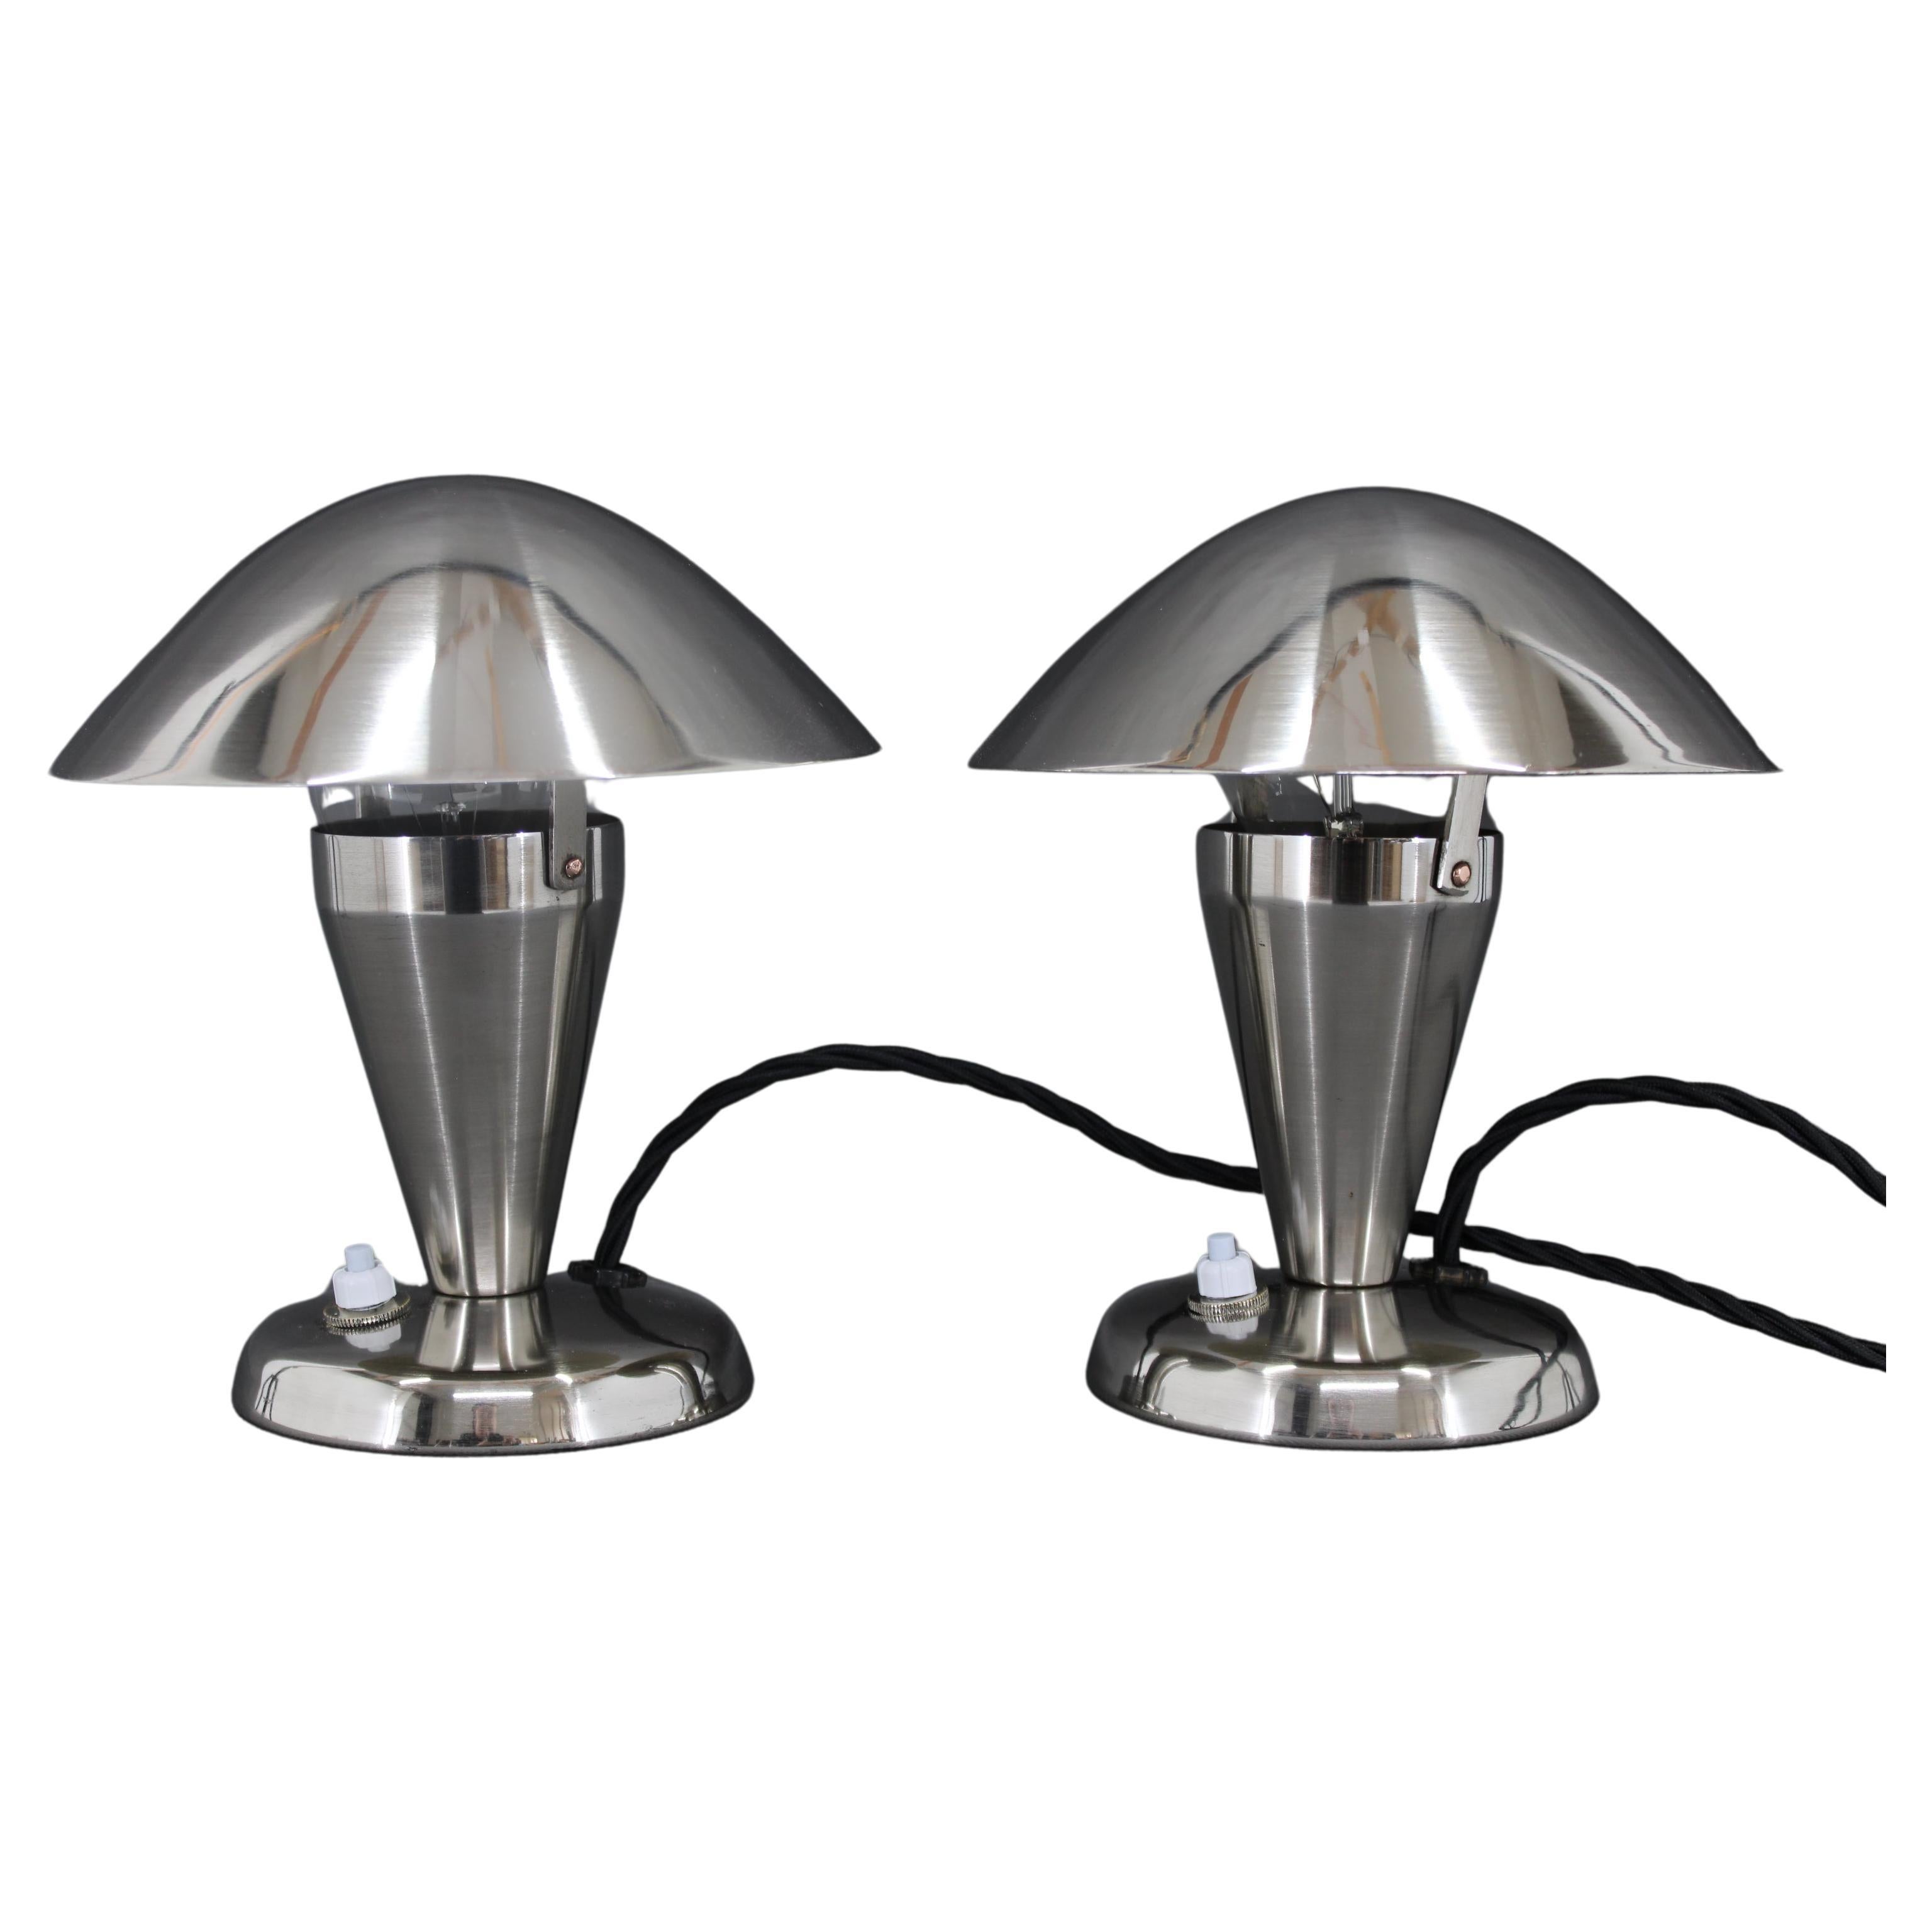 1930s Pair of Restored Bauhaus Table Lamps, Czechoslovakia For Sale